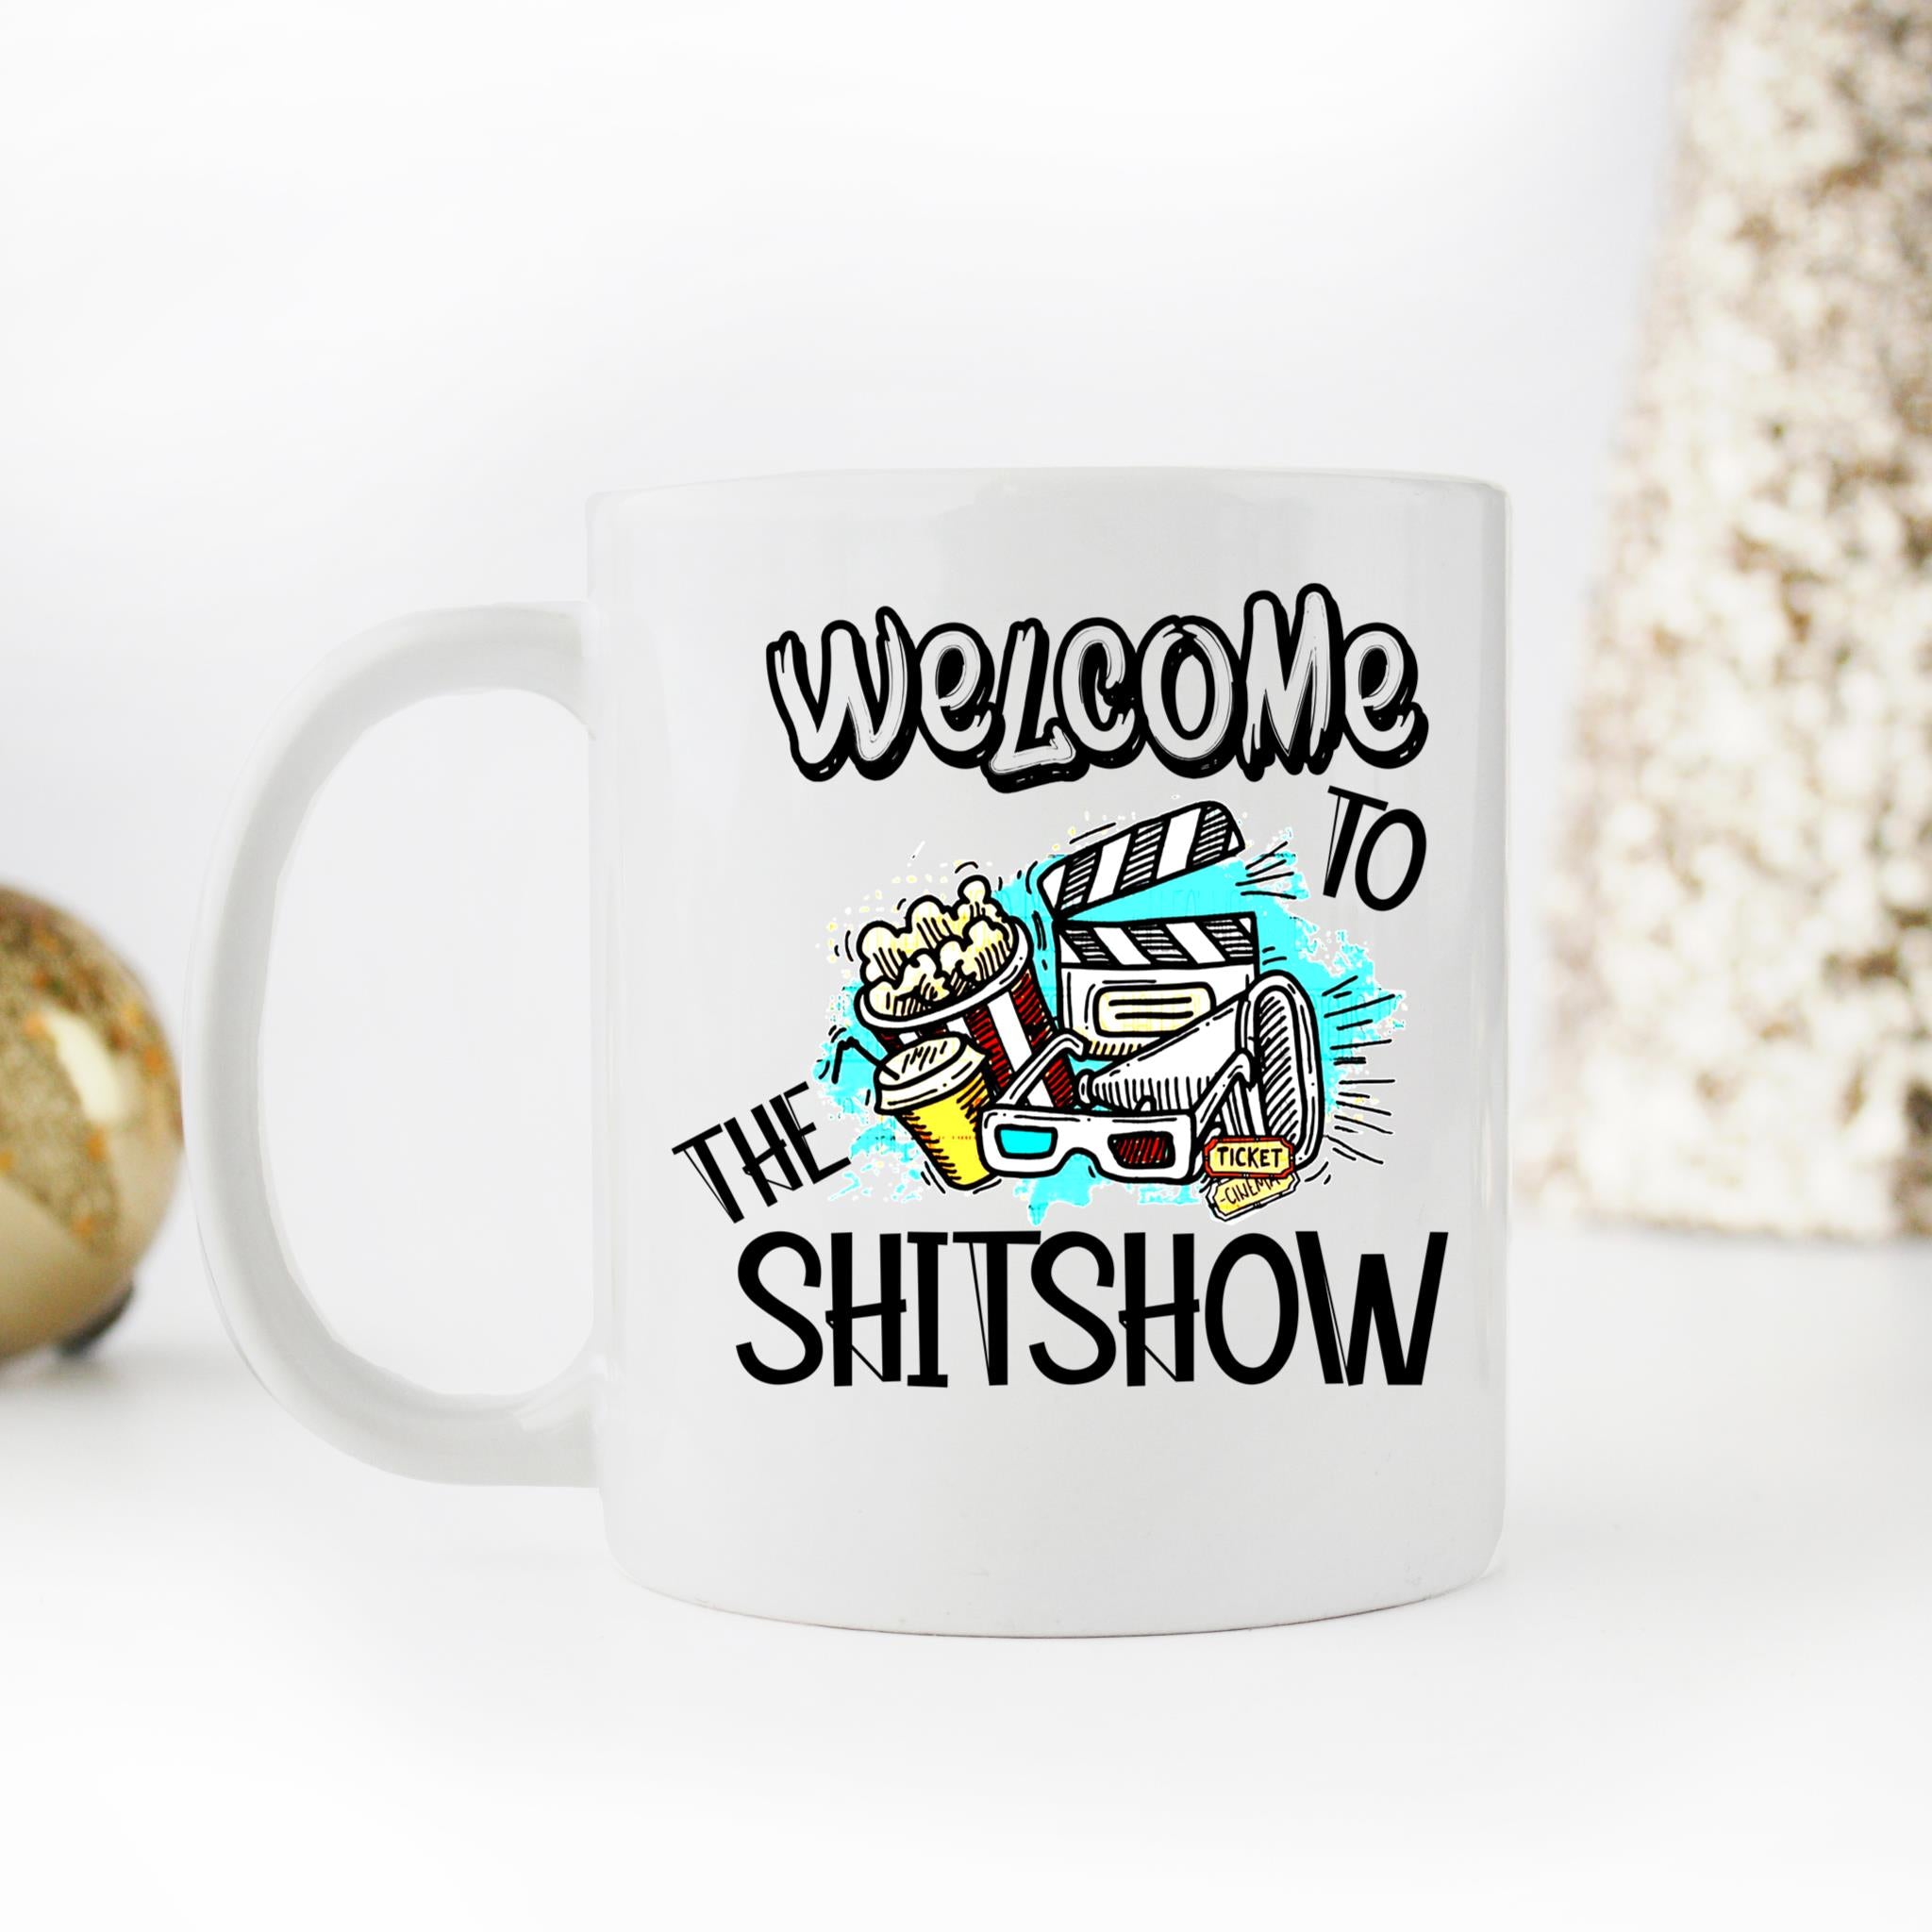 Skitongifts Coffee Mug Funny Ceramic Novelty Welcome To The Shitshow Kd55yhr